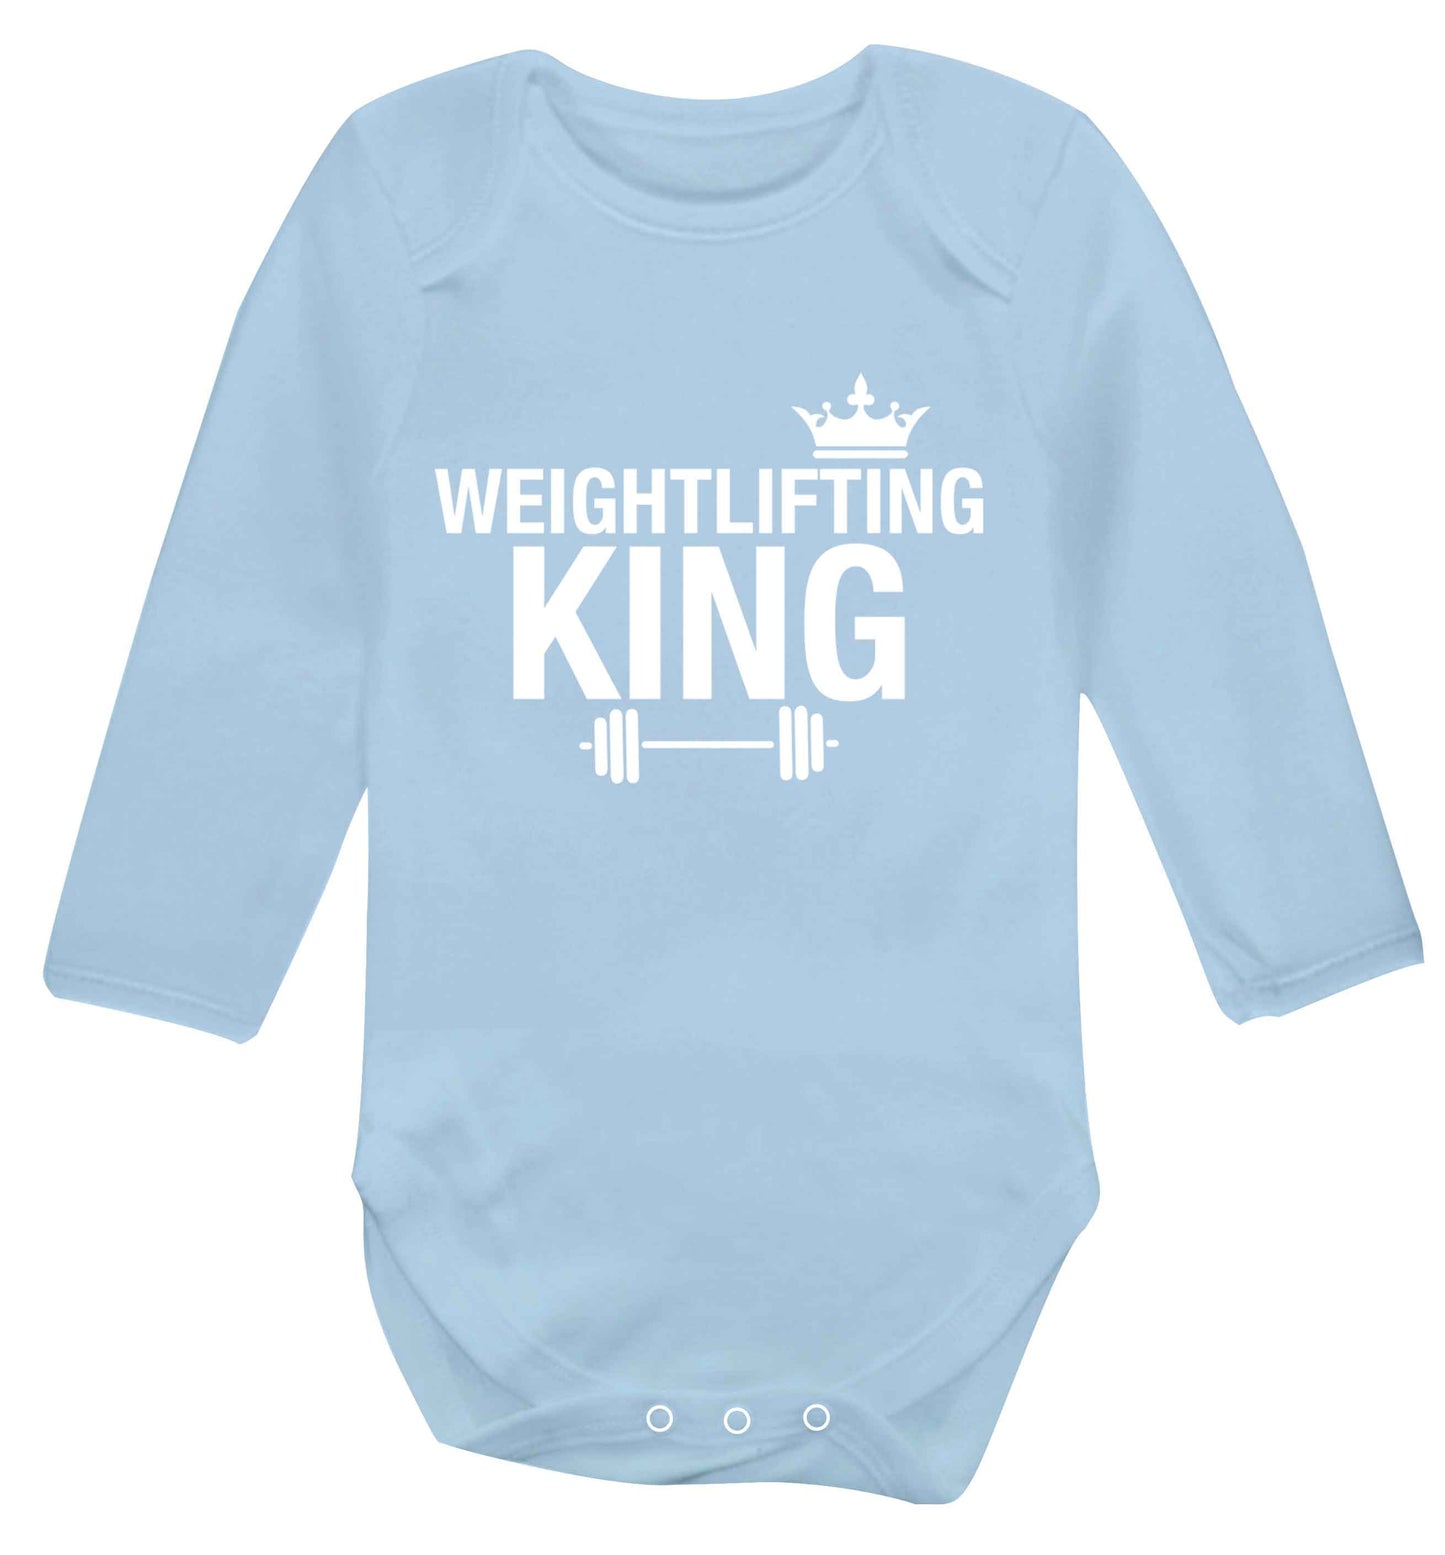 Weightlifting king Baby Vest long sleeved pale blue 6-12 months